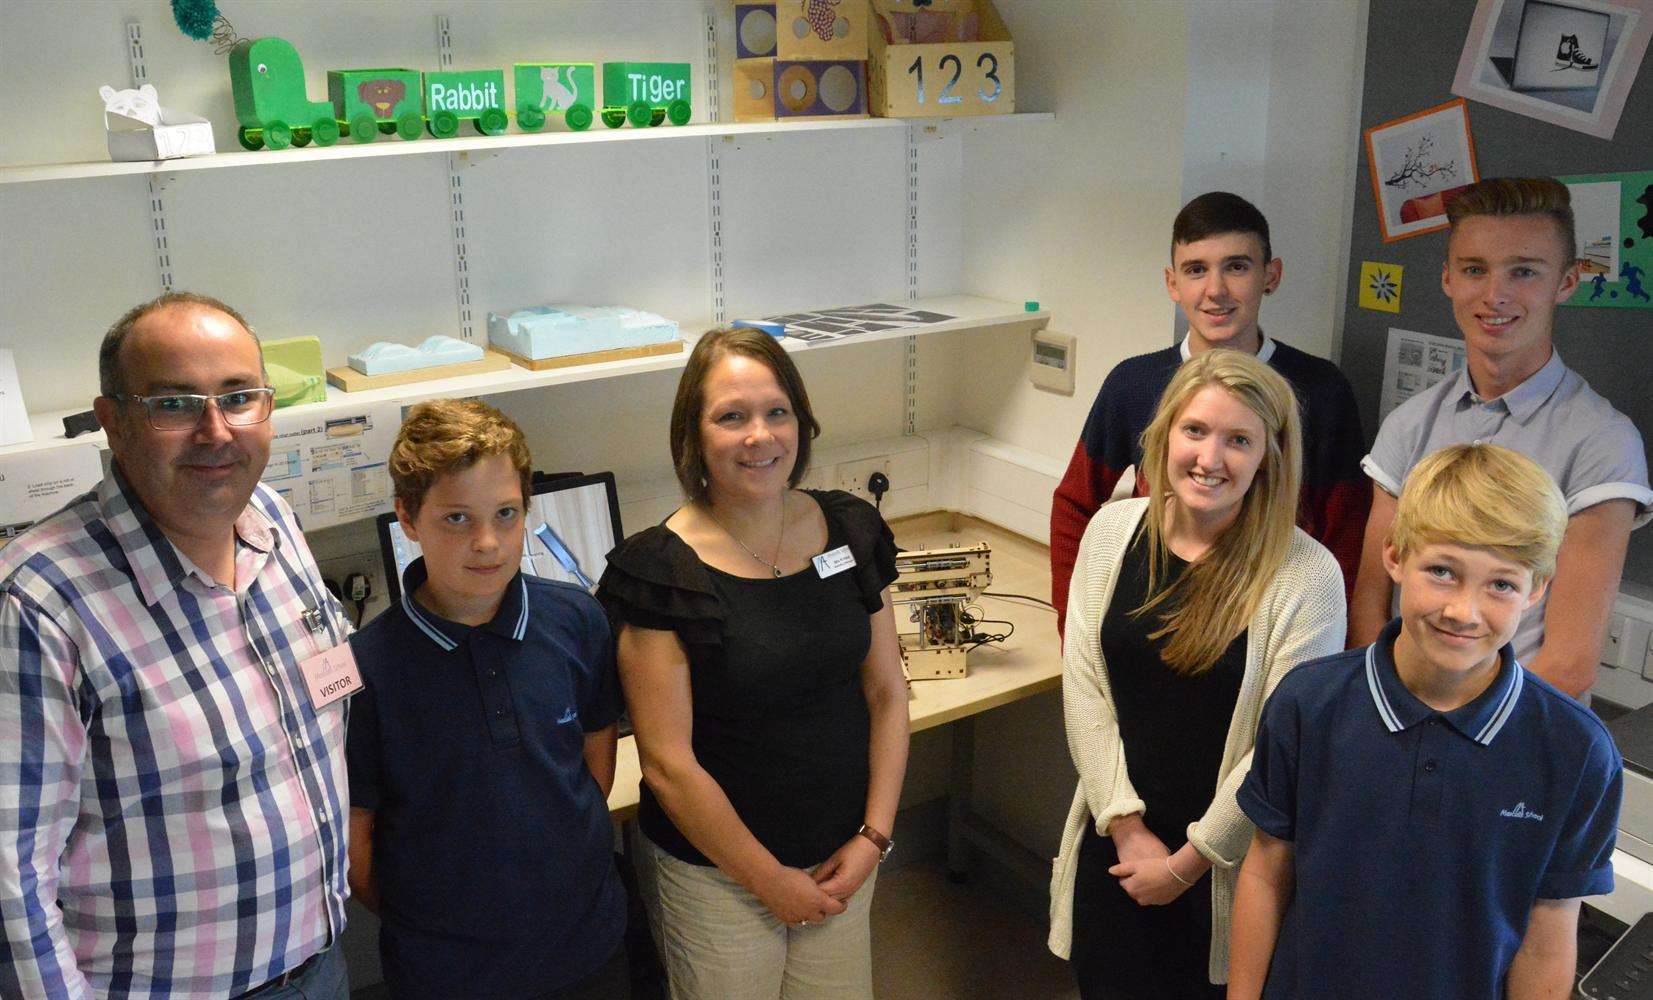 Mascalls staff members Rachel Hirst and Chloe James, centre, with design technology pupils and Chris Callander from BSK-CiC, far left